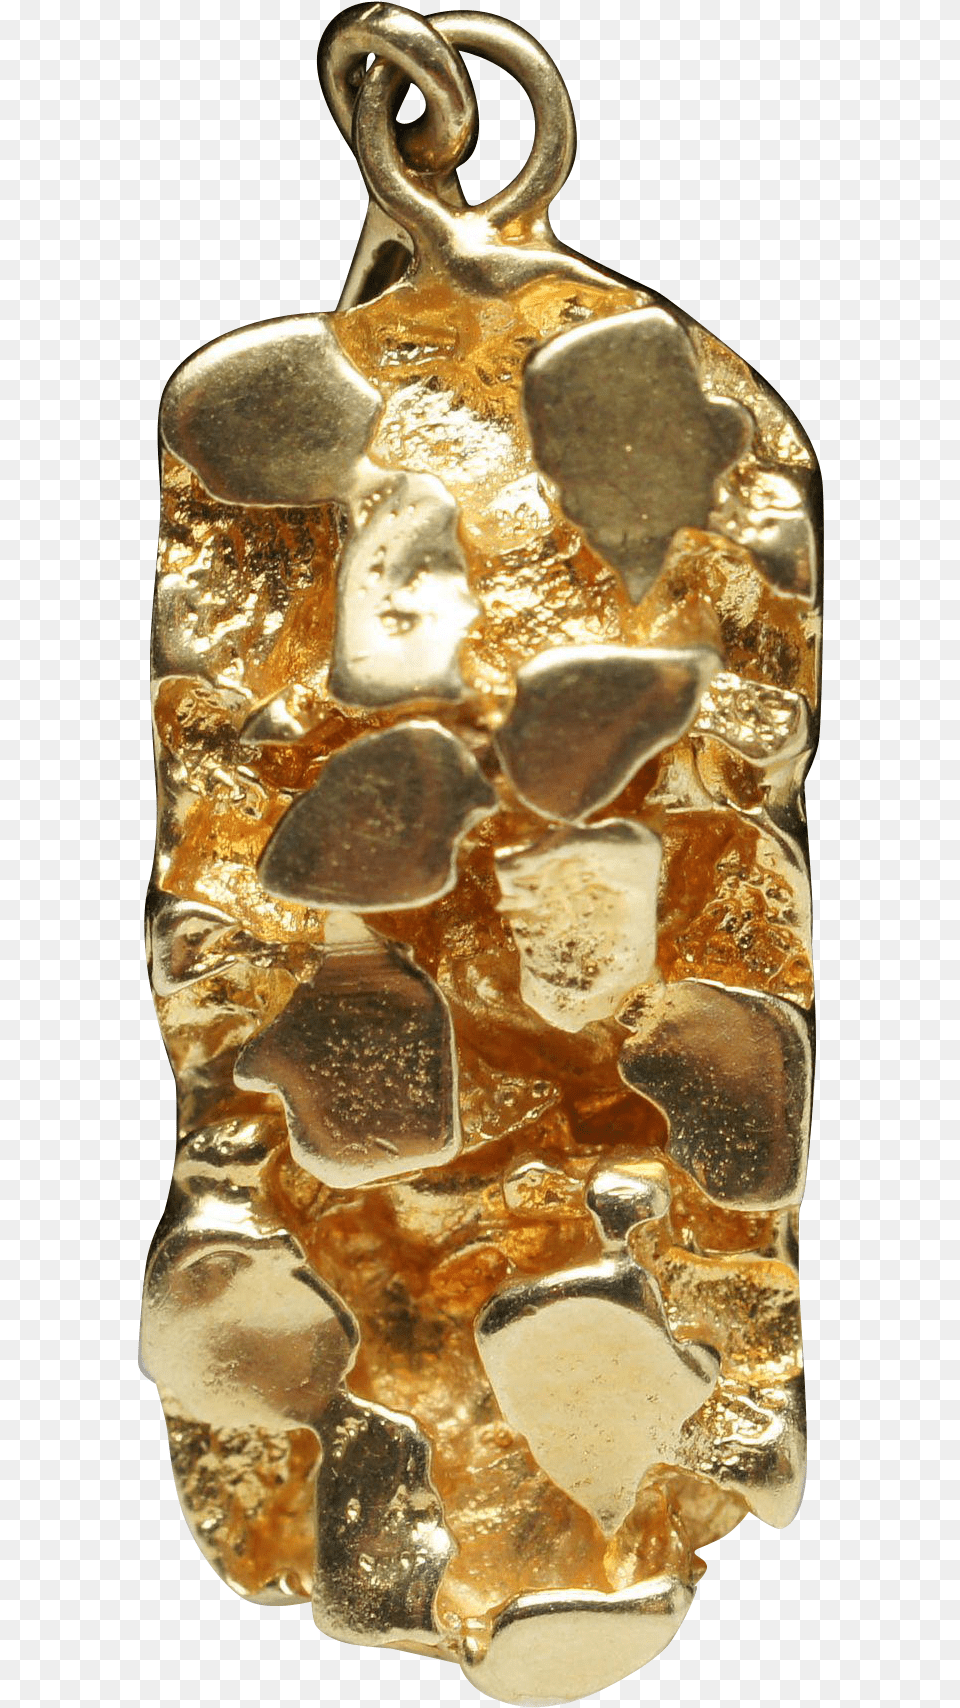 Download Gold Nuggets Image For Pingente De Pepita De Ouro, Accessories, Gemstone, Jewelry, Ornament Free Png